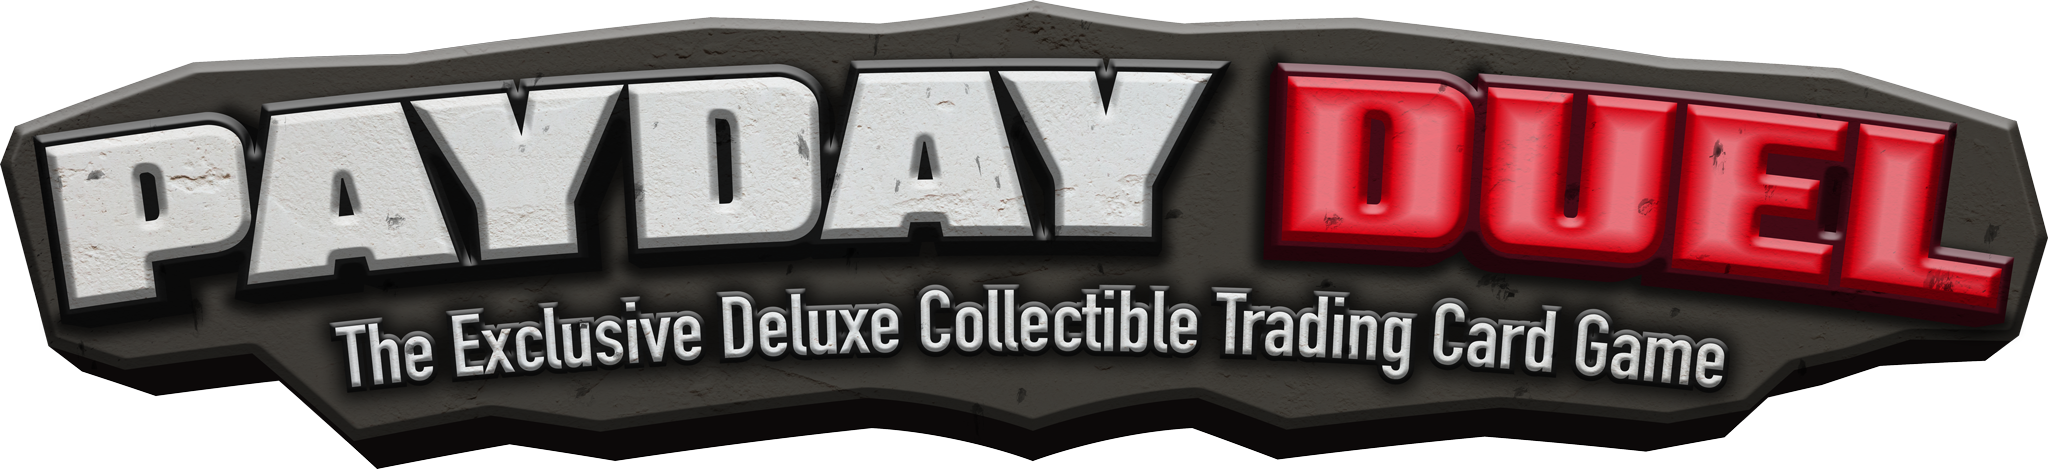 PAYDAY Duel: The Exclusive Deluxe Collectible Trading Card Game